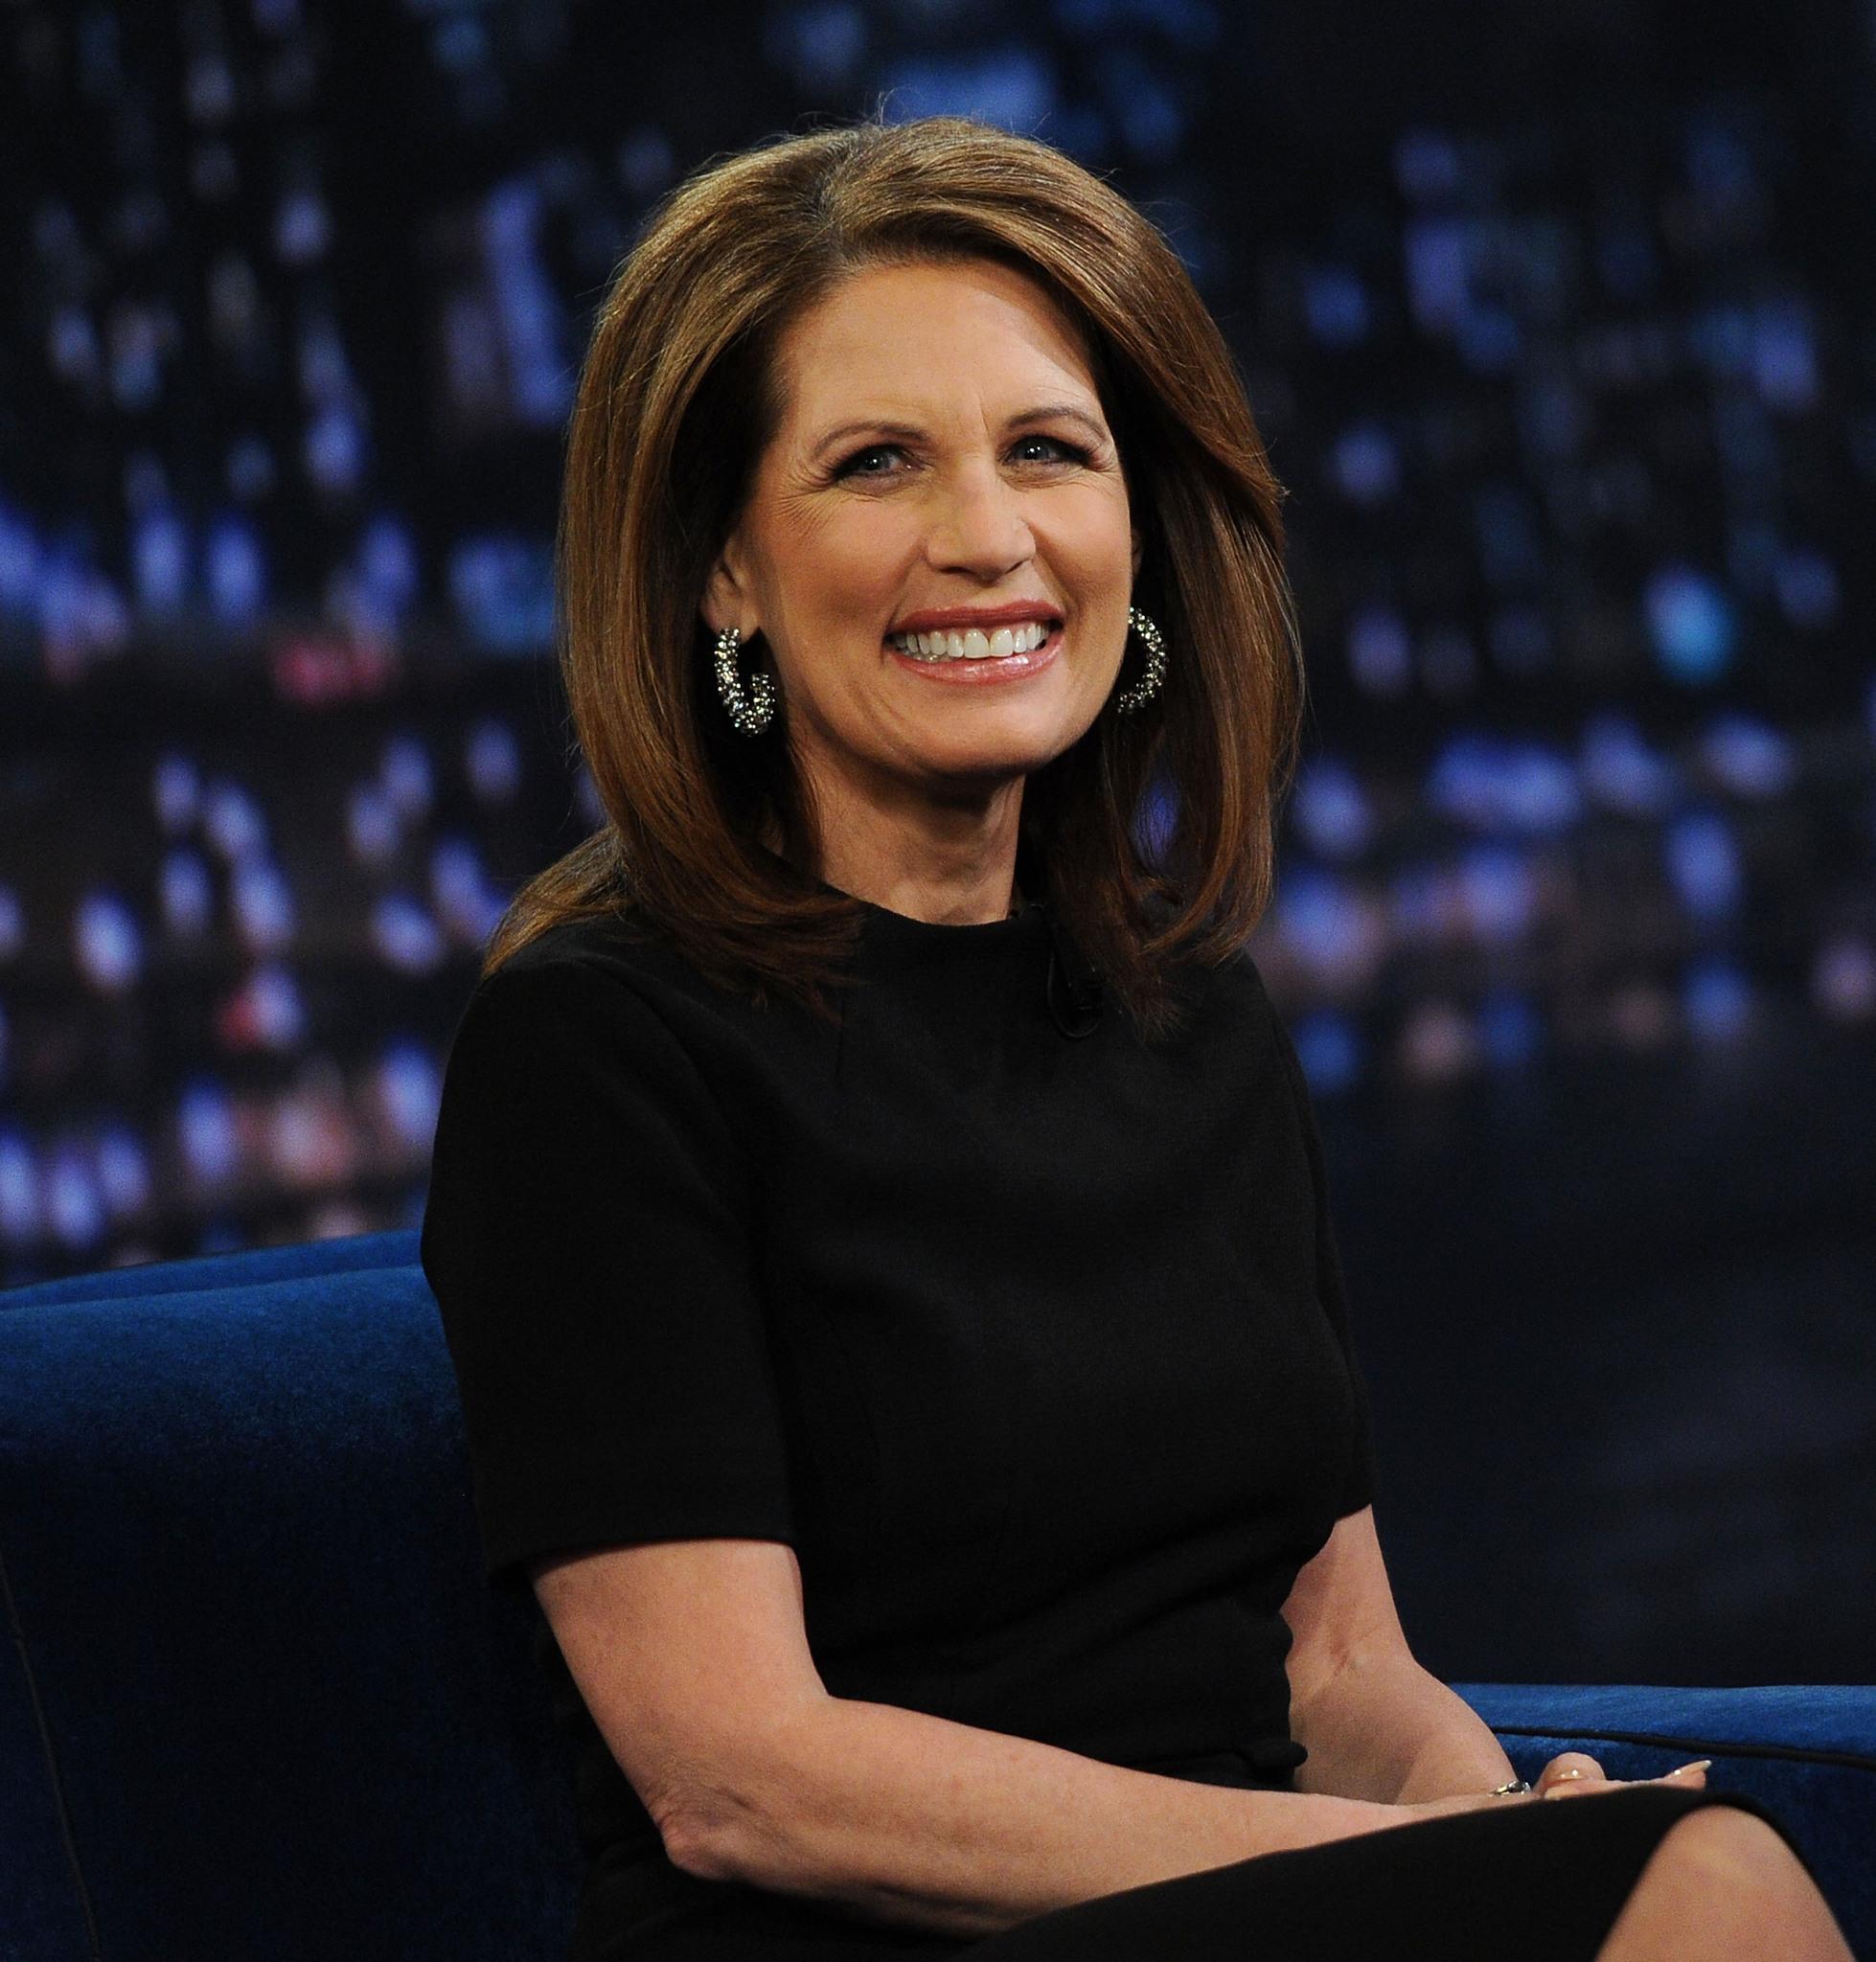 Michele Bachmann at event of Late Night with Jimmy Fallon (2009)